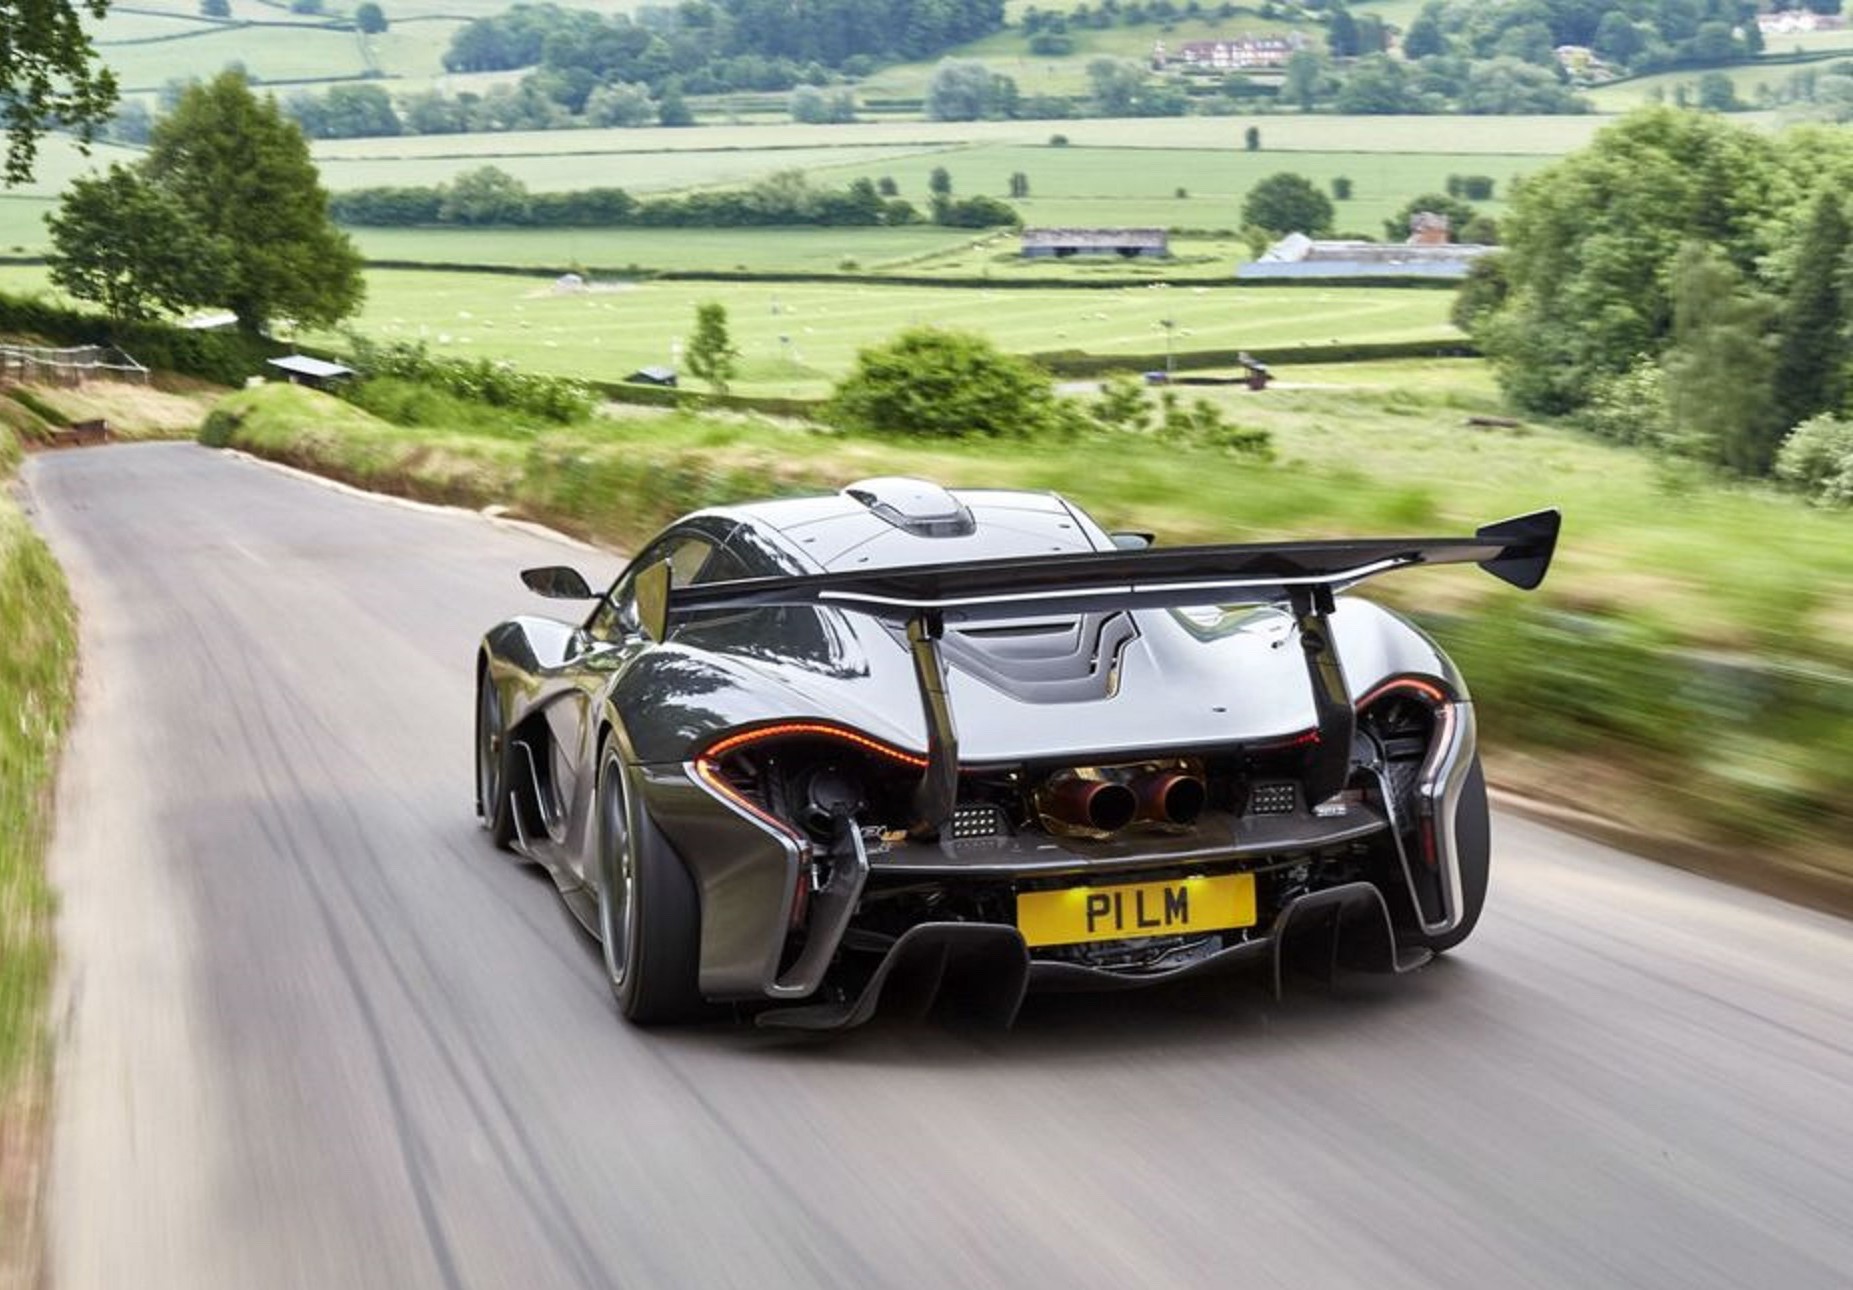 The McLaren P1 LM is a track-only P1 GTR modified for road use.